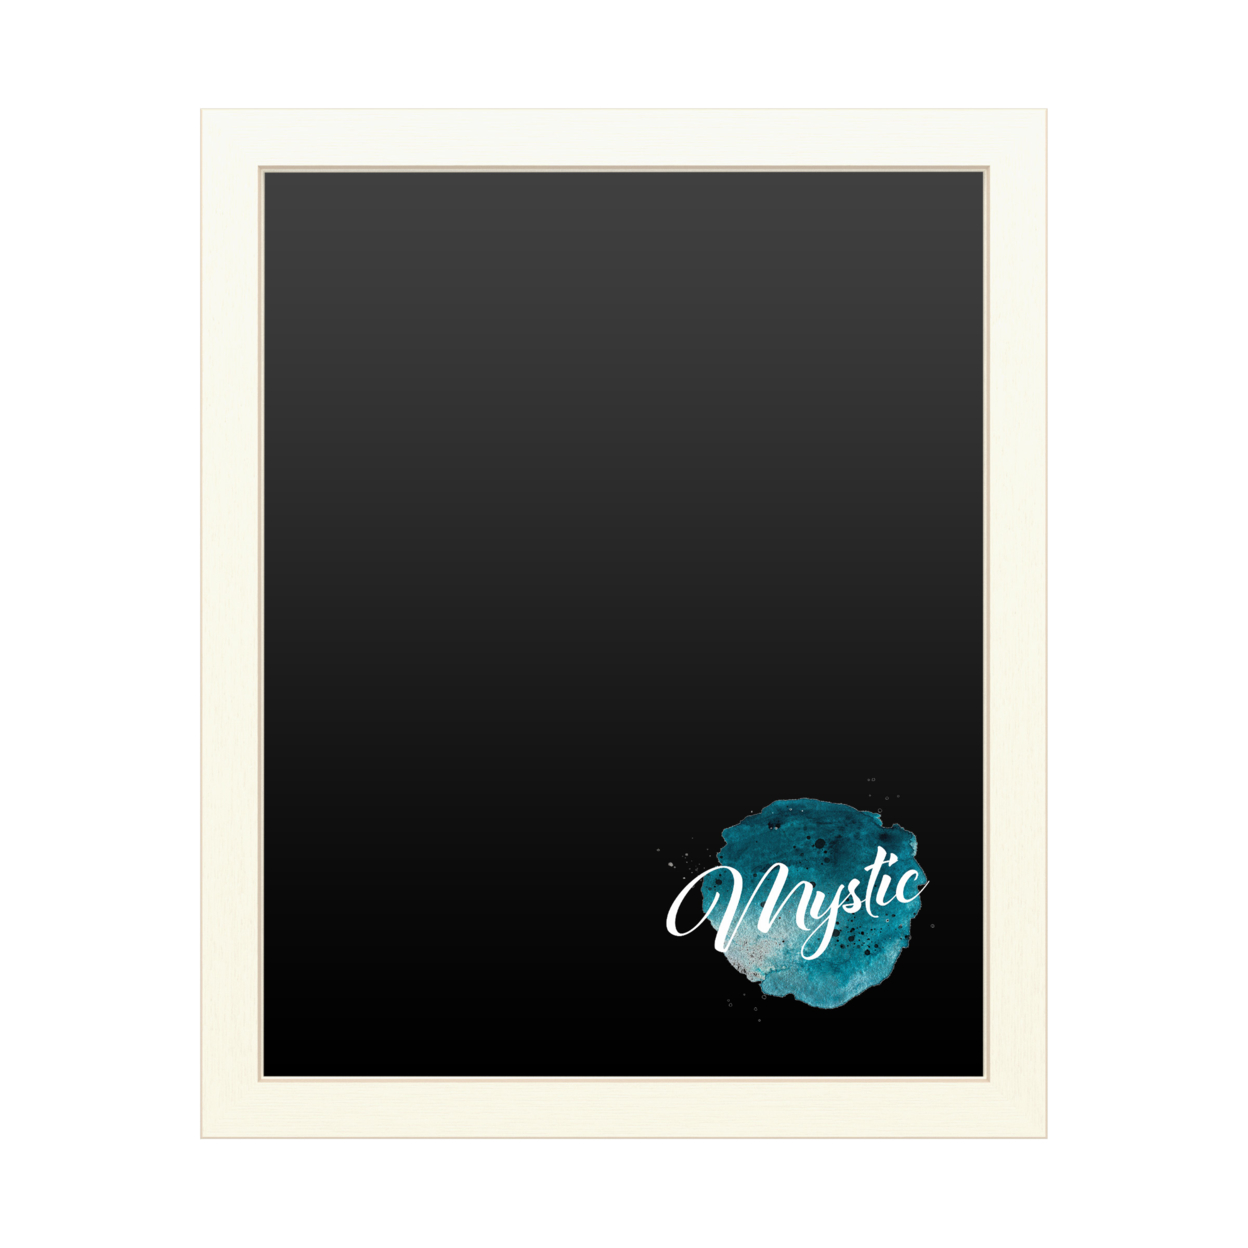 16 X 20 Chalk Board With Printed Artwork - TypeLike Mystic Water White Board - Ready To Hang Chalkboard